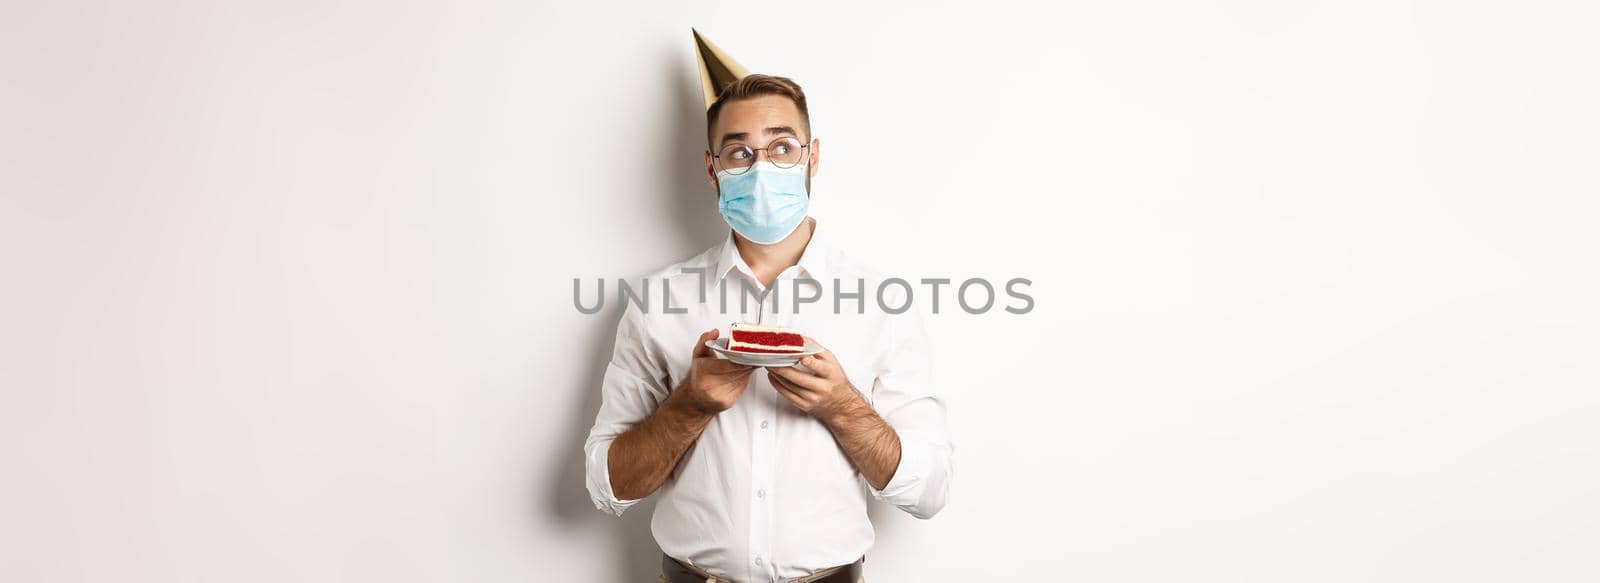 Covid-19, social distancing and celebration. Thoughtful man holding birthday cake, making wish and wearing face mask on quarantine, white background.